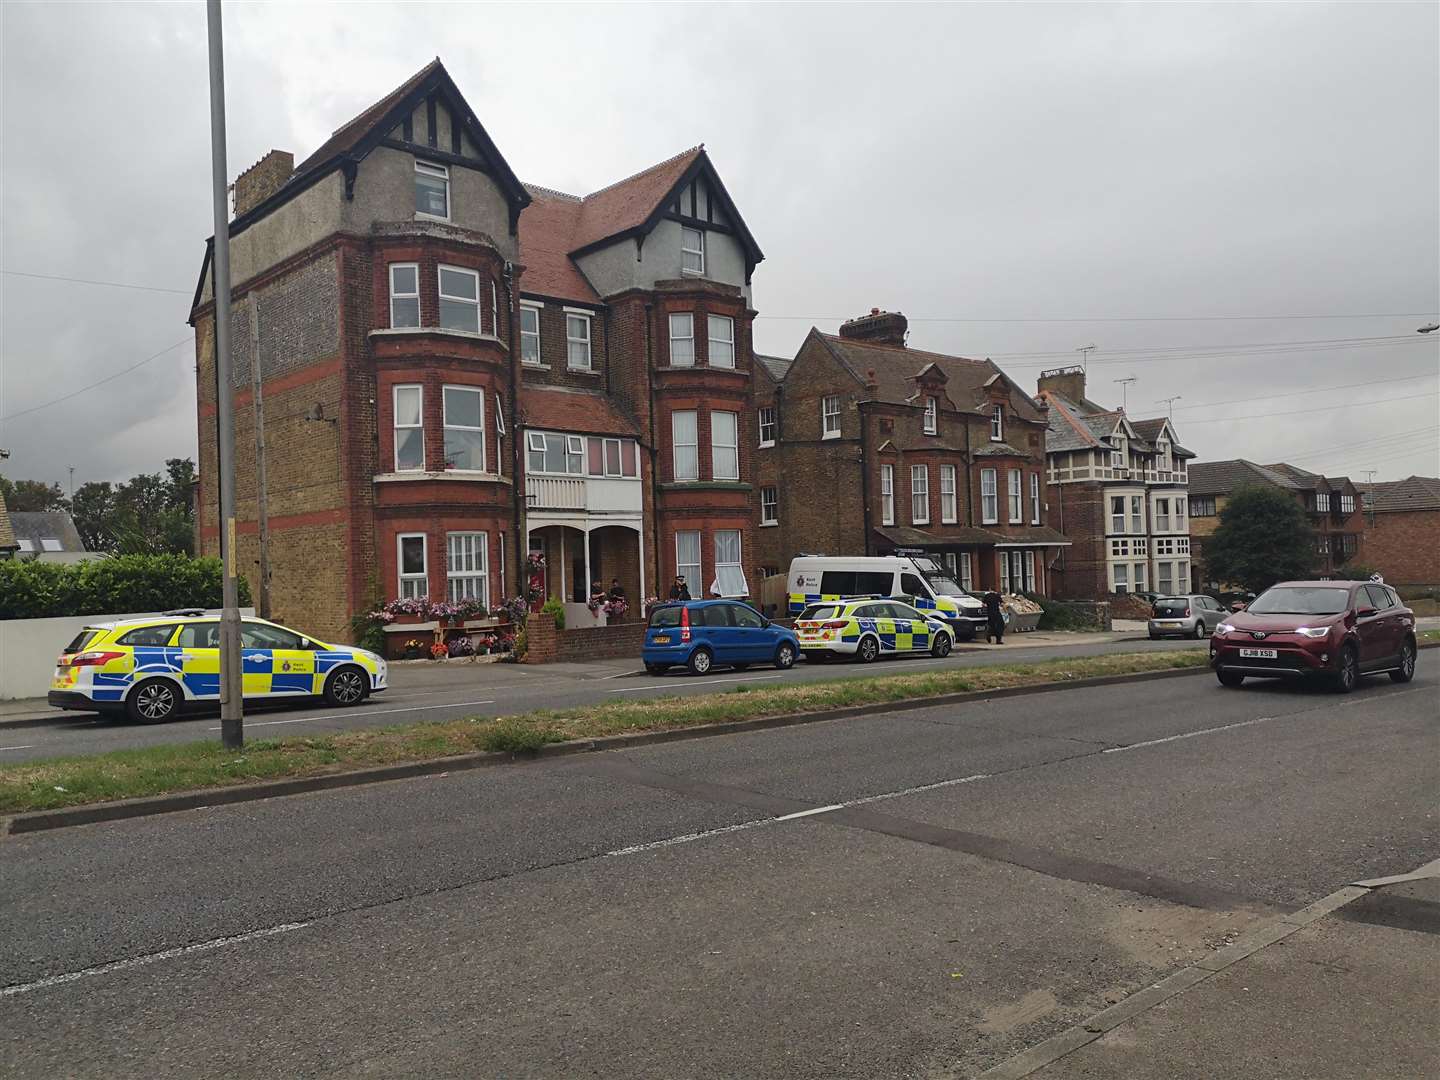 Bomb disposal teams have been sent to the address on Canterbury Road